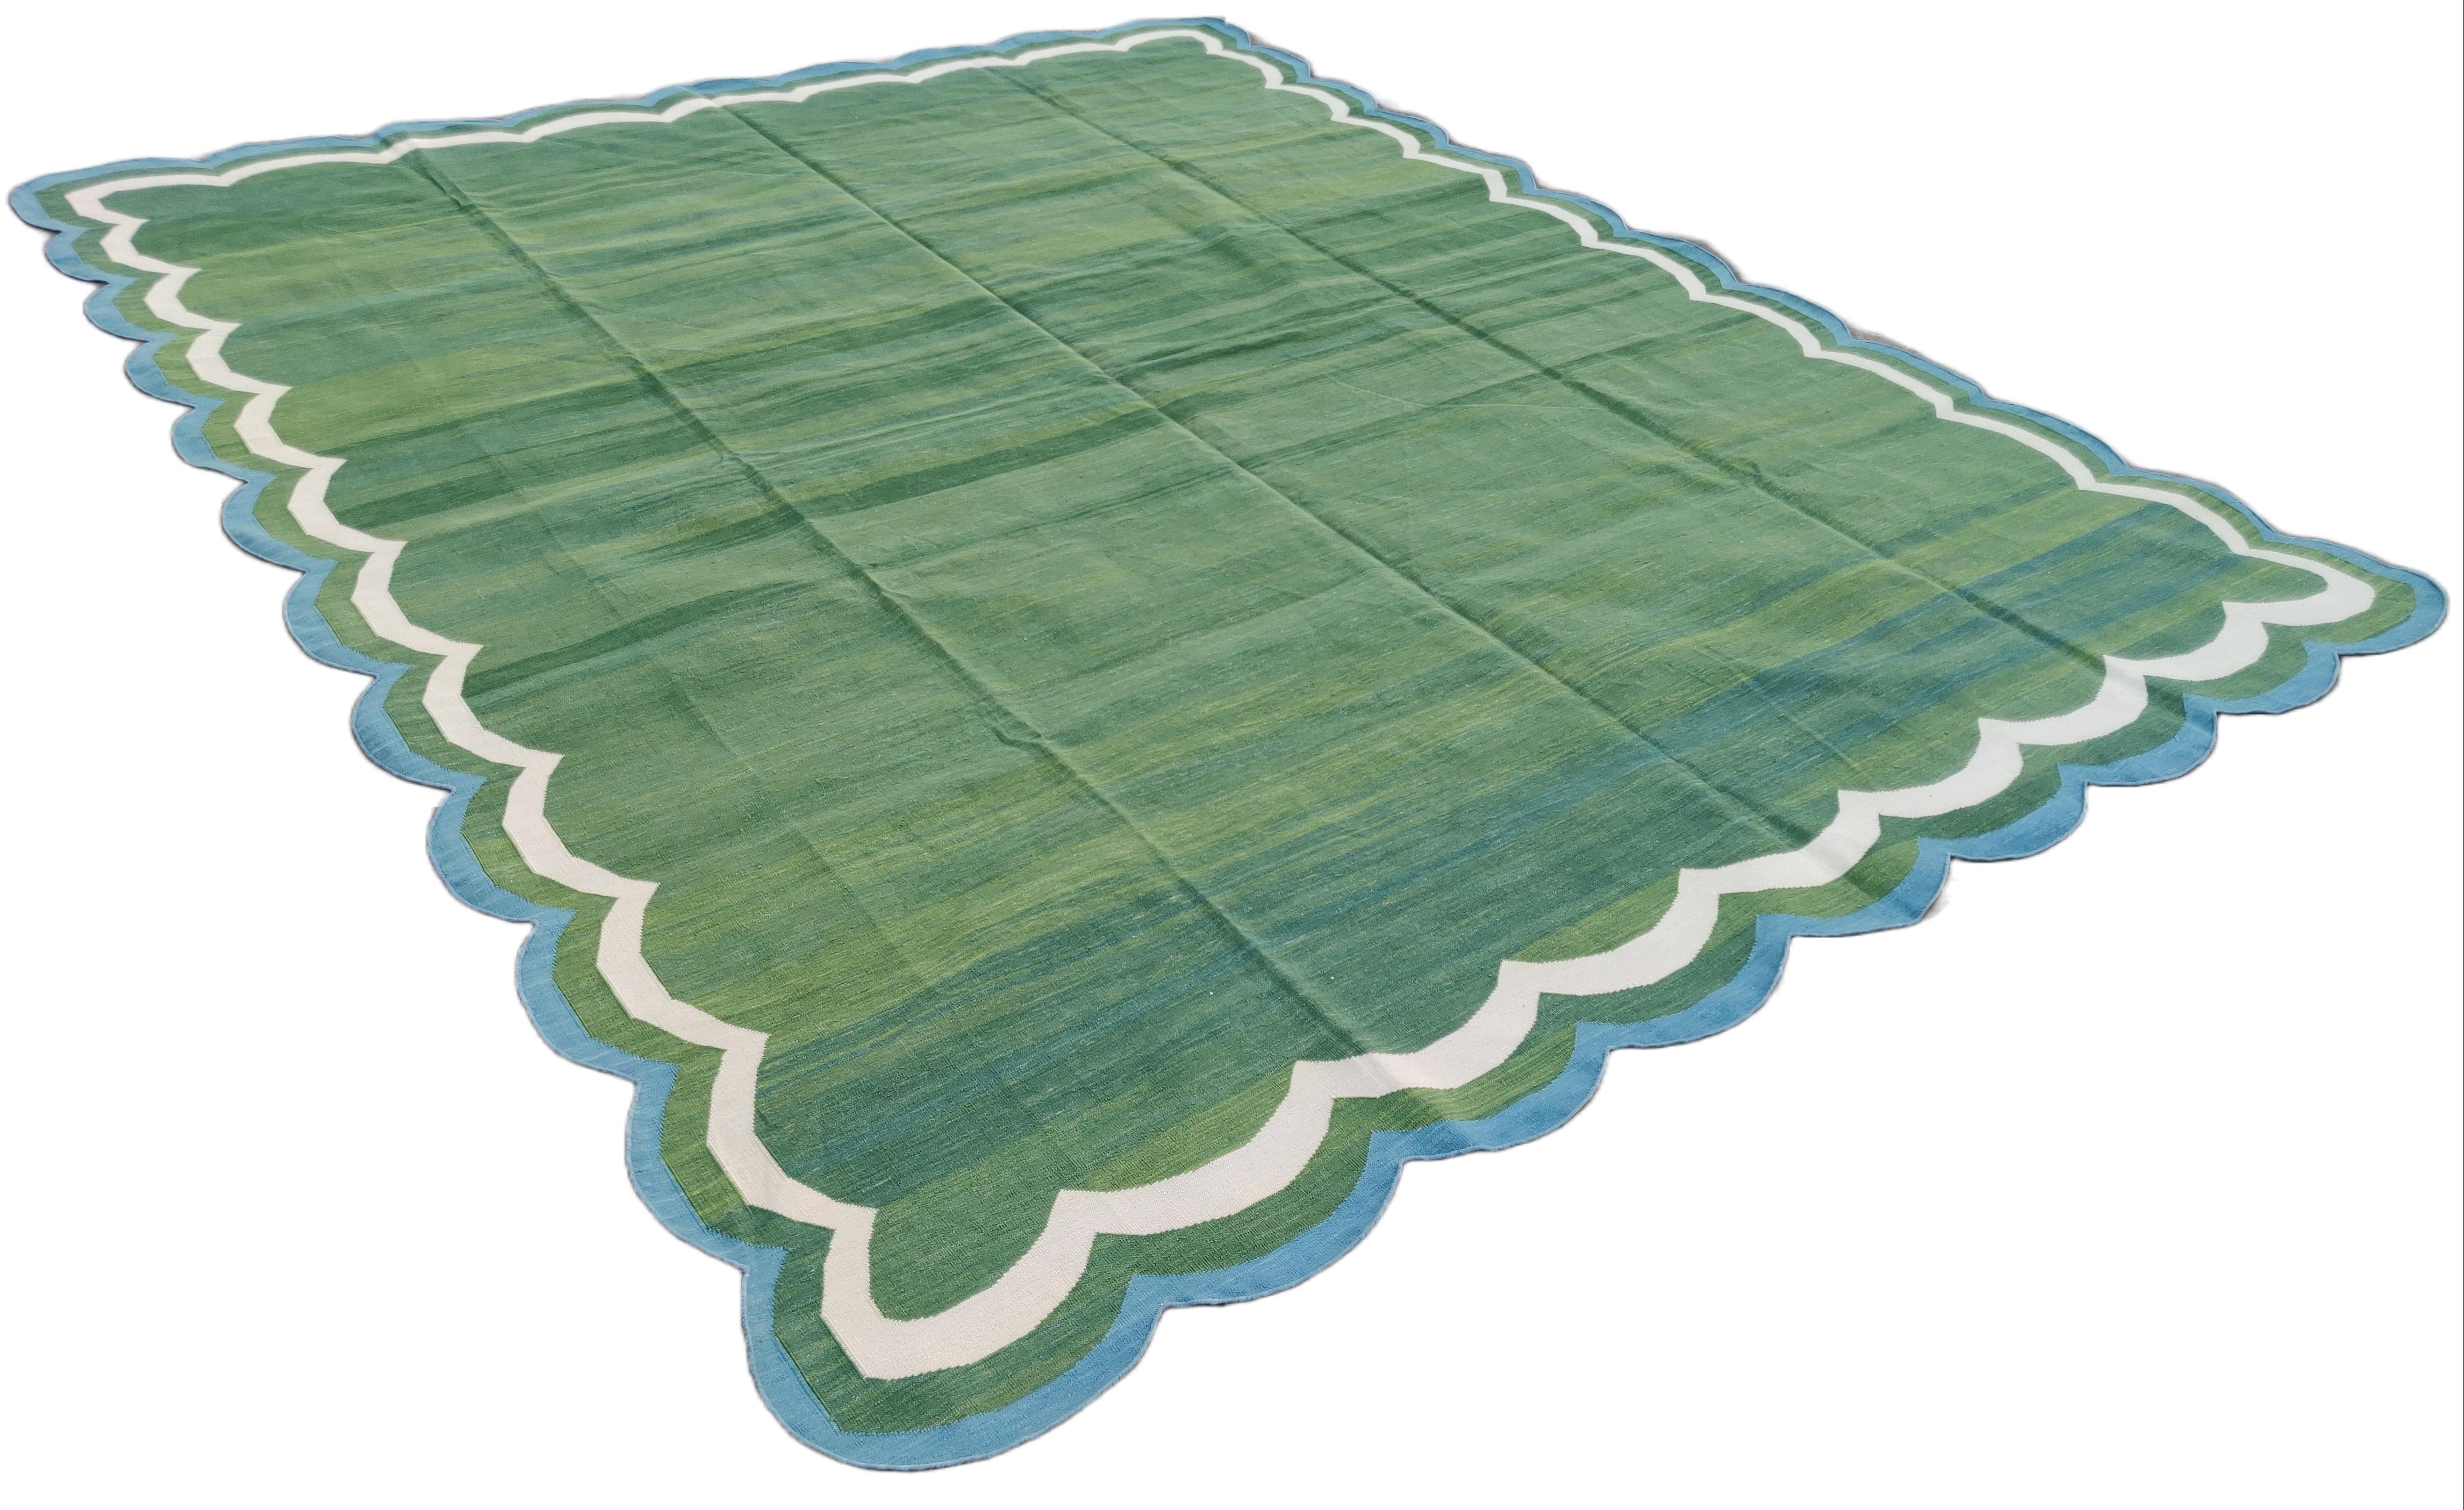 Cotton Vegetable Dyed Area Rug, Forest Green And Blue Four Sided Scalloped Rug-9'x12'
These special flat-weave dhurries are hand-woven with 15 ply 100% cotton yarn. Due to the special manufacturing techniques used to create our rugs, the size and